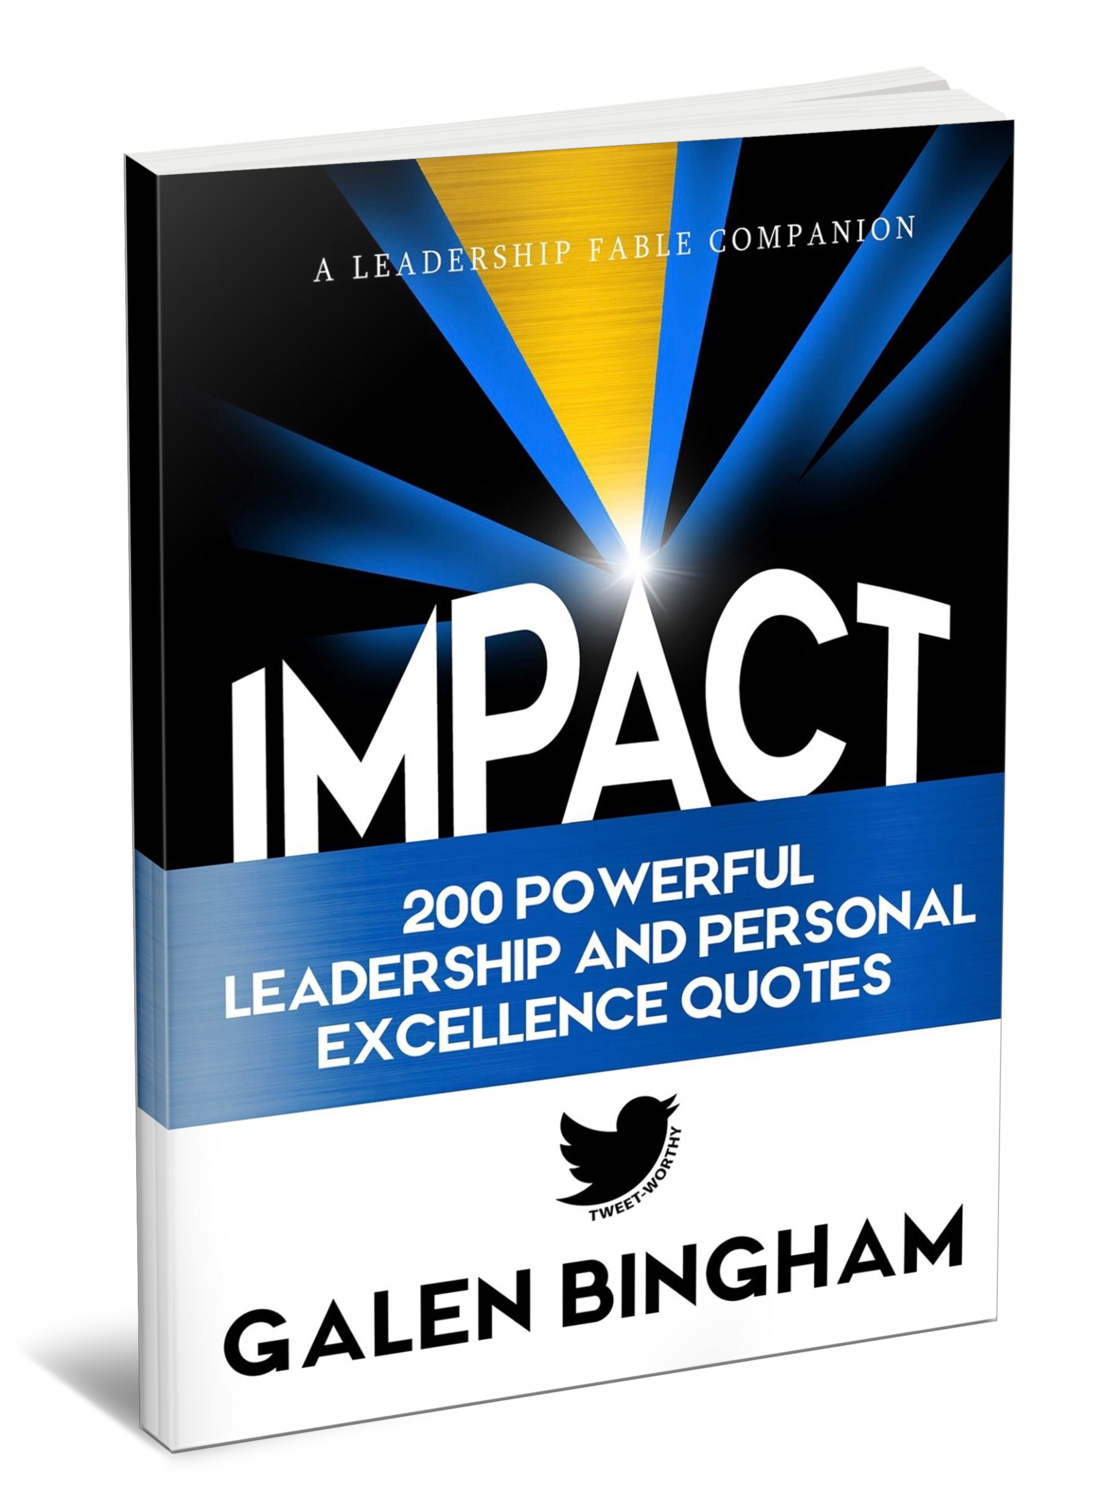 IMPACT: A Leadership Fable Companion: 200 Powerful Leadership and Personal Excellence Quotes